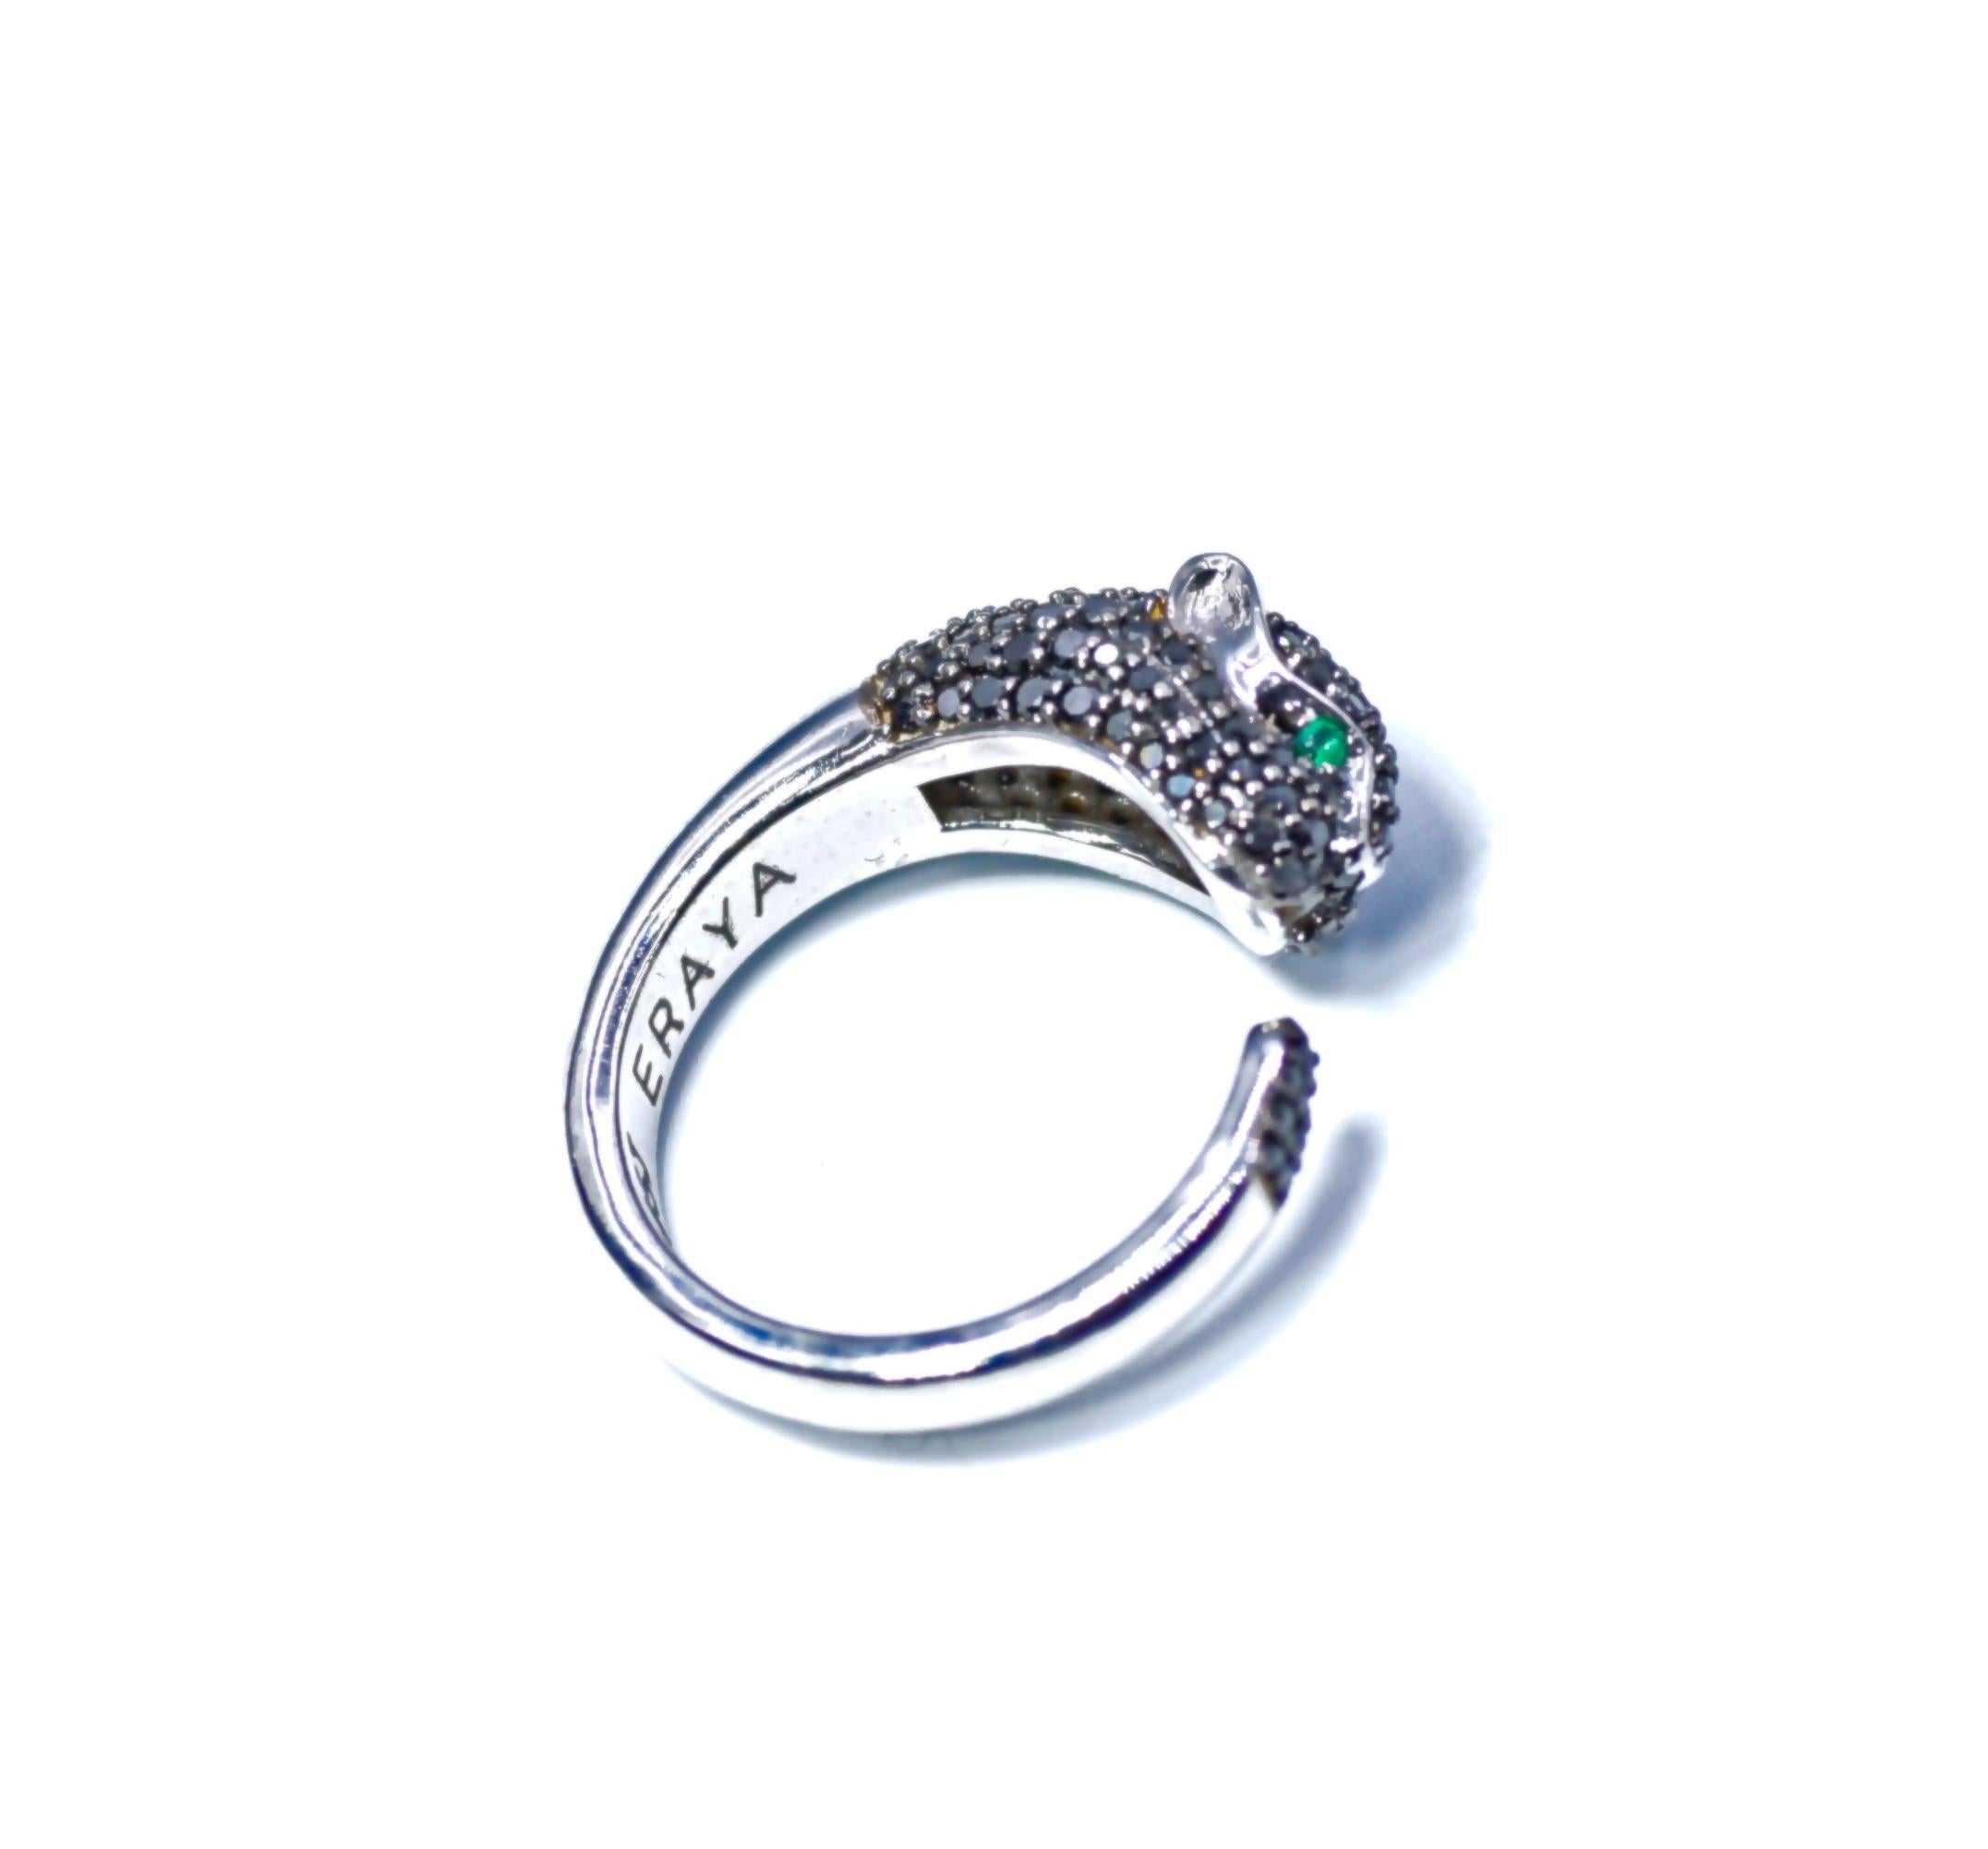 This exquisite Diamond Panther Ring has dazzling black diamonds set in 18k white gold will definitely be the Cocktail ring. 
Most of our jewels are made to order, so please allow us for a 2-4 week delivery.
Please note the possibility of natural